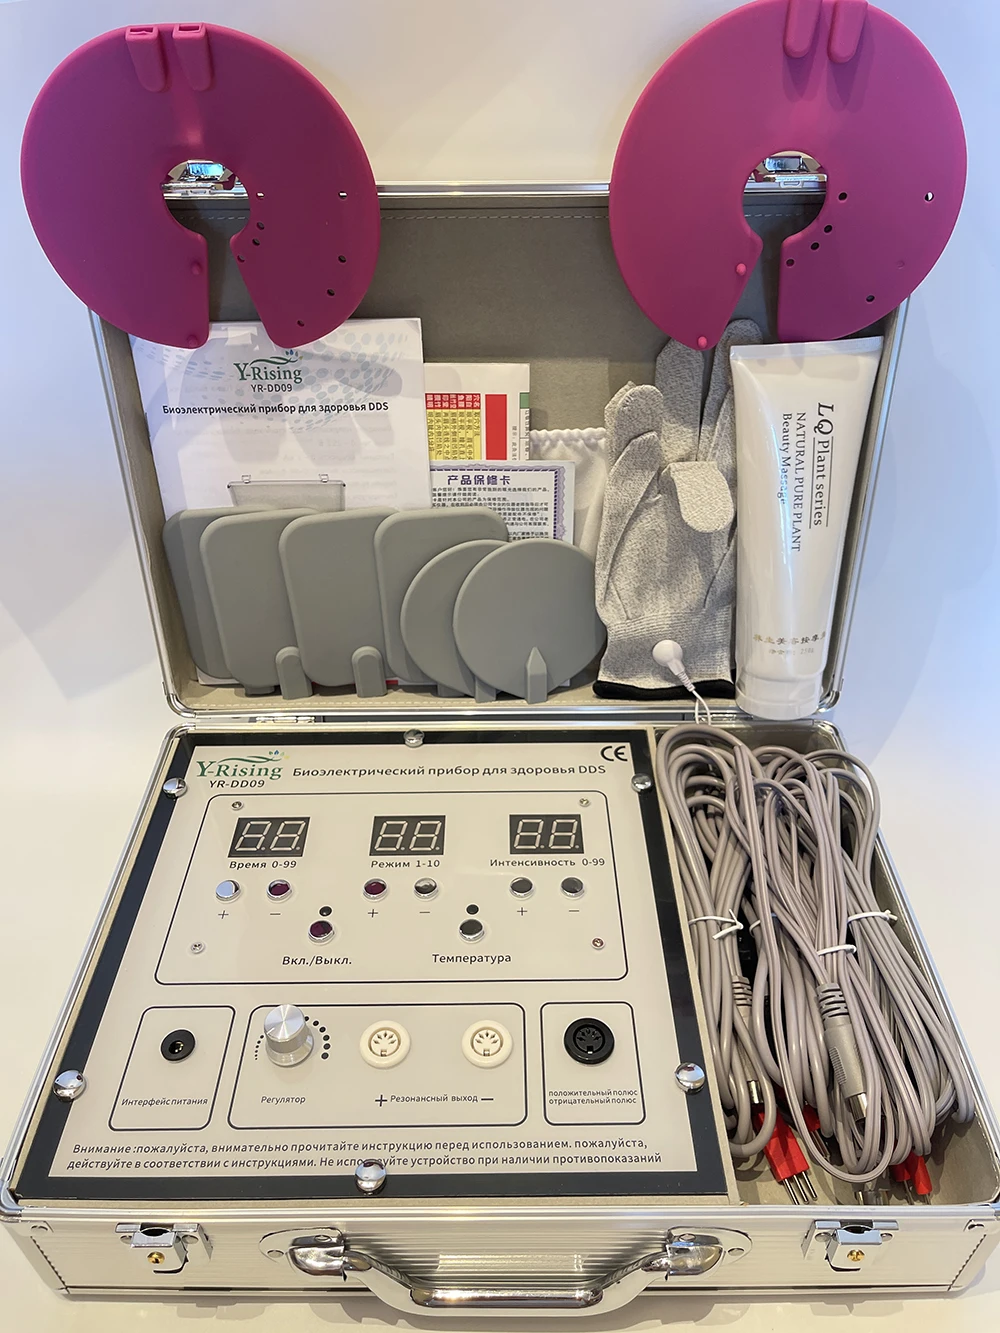 Russian version Physiotherapy Bioelectricity Dds Body Slimming Beauty Equipment ложка матрёшка сувенирная russian beauty